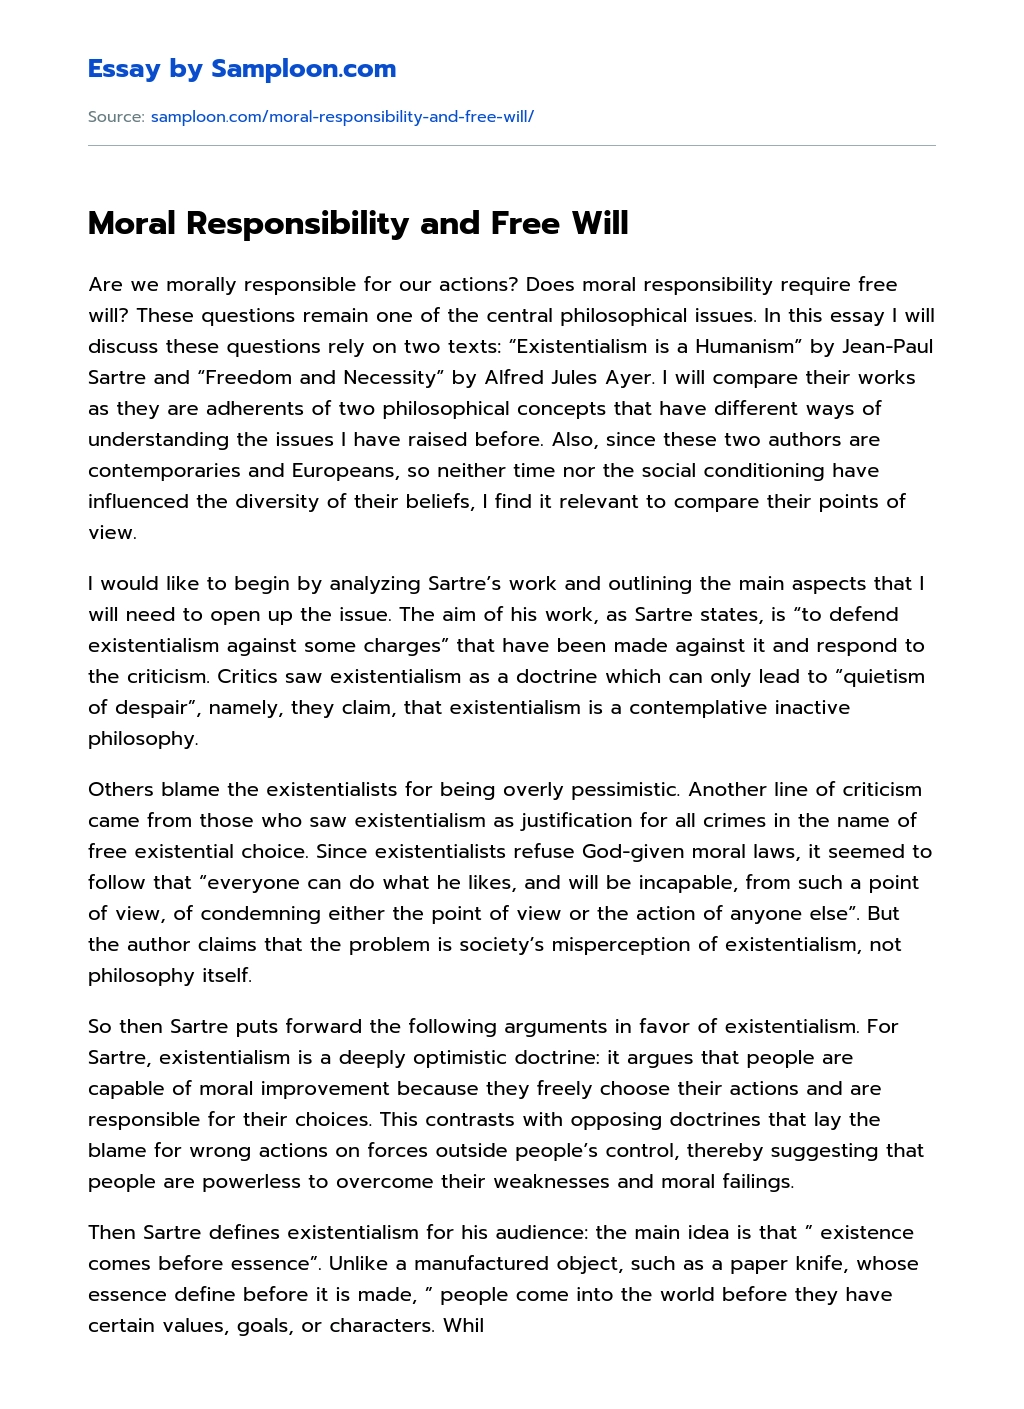 Moral Responsibility and Free Will essay